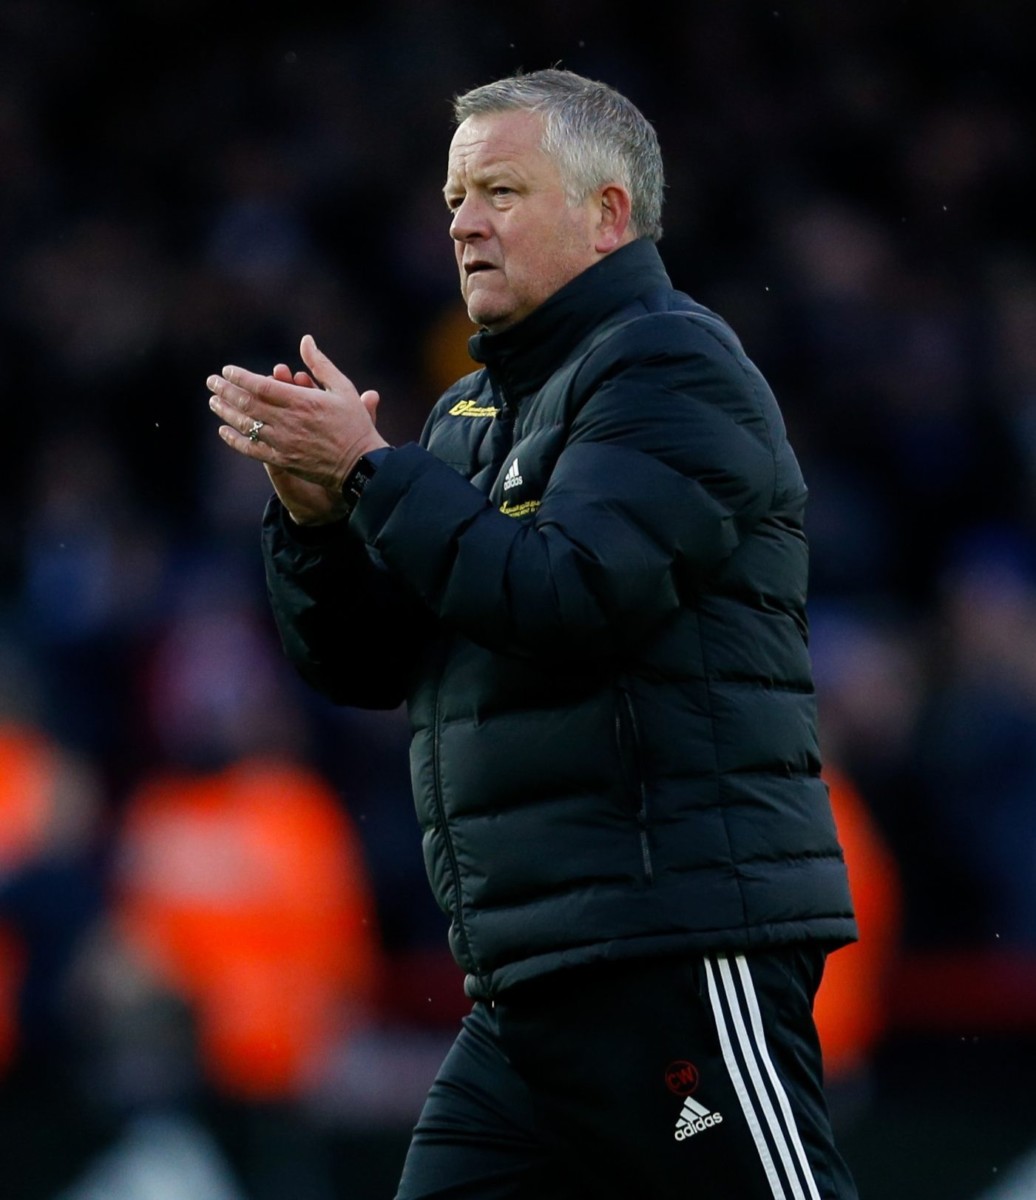 Sheffield United boss Chris Wilder, seen after Saturday's 1-1 draw with Brighton, is dreaming of recruiting top prospects like Kalvin Phillips